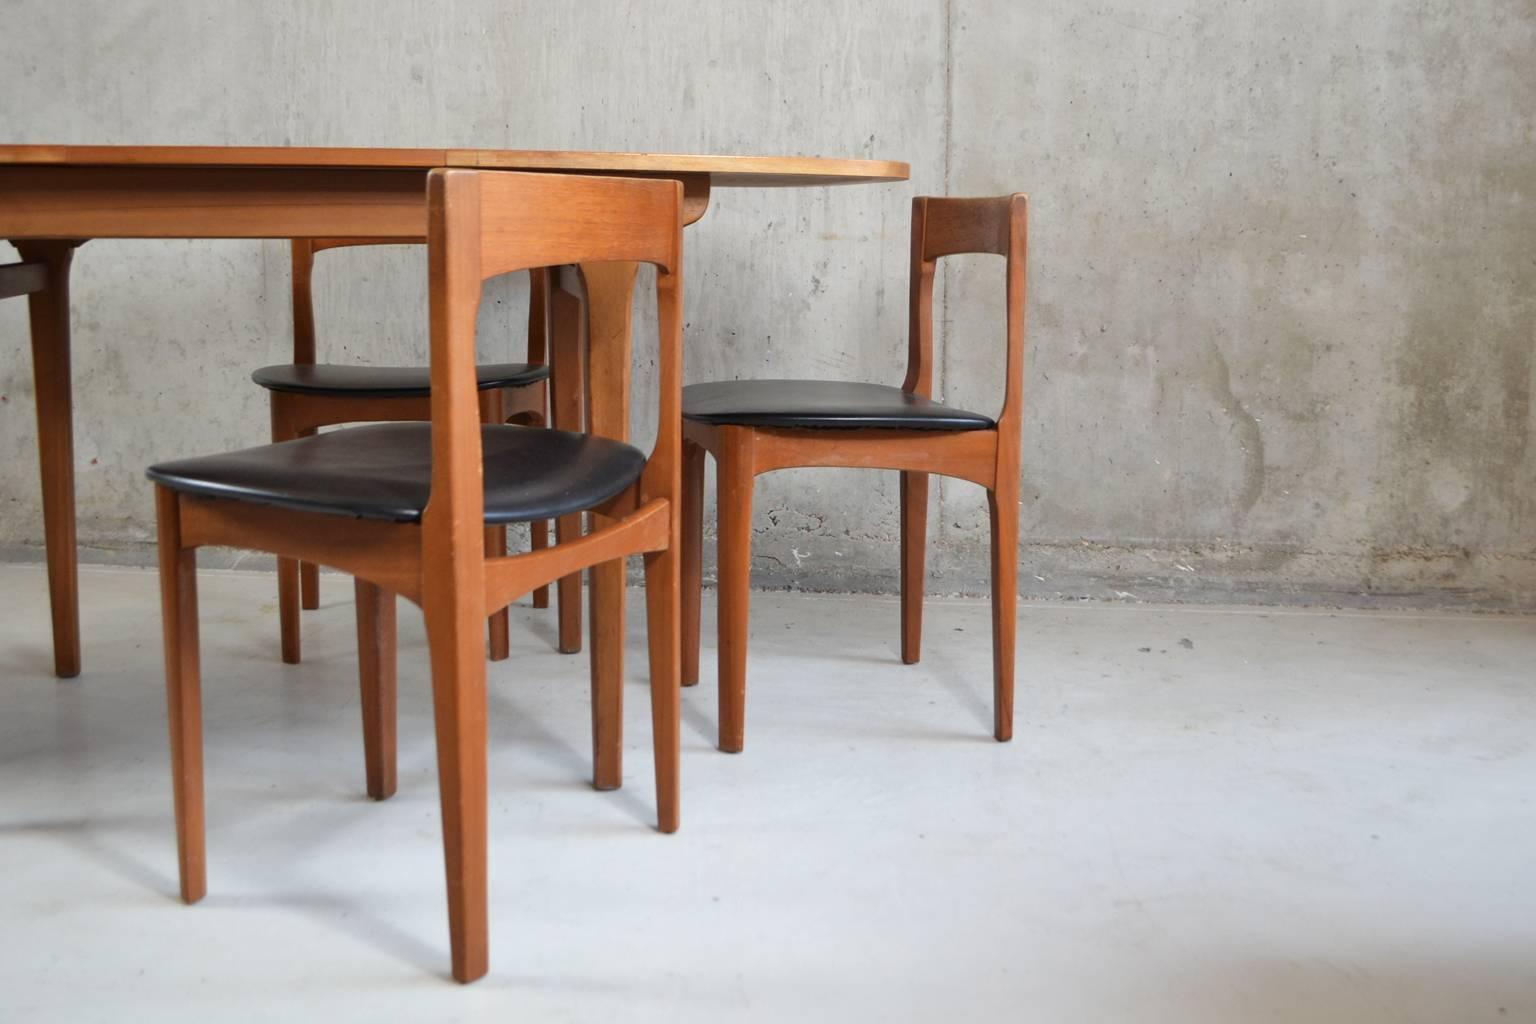 A stylish dining set by English furniture company Nathan. The table is an elegant shape with broad rounded corners. It extends by means of a tilting panel in the middle of the table. The matching chairs are teak with black vinyl seats.

Designer: